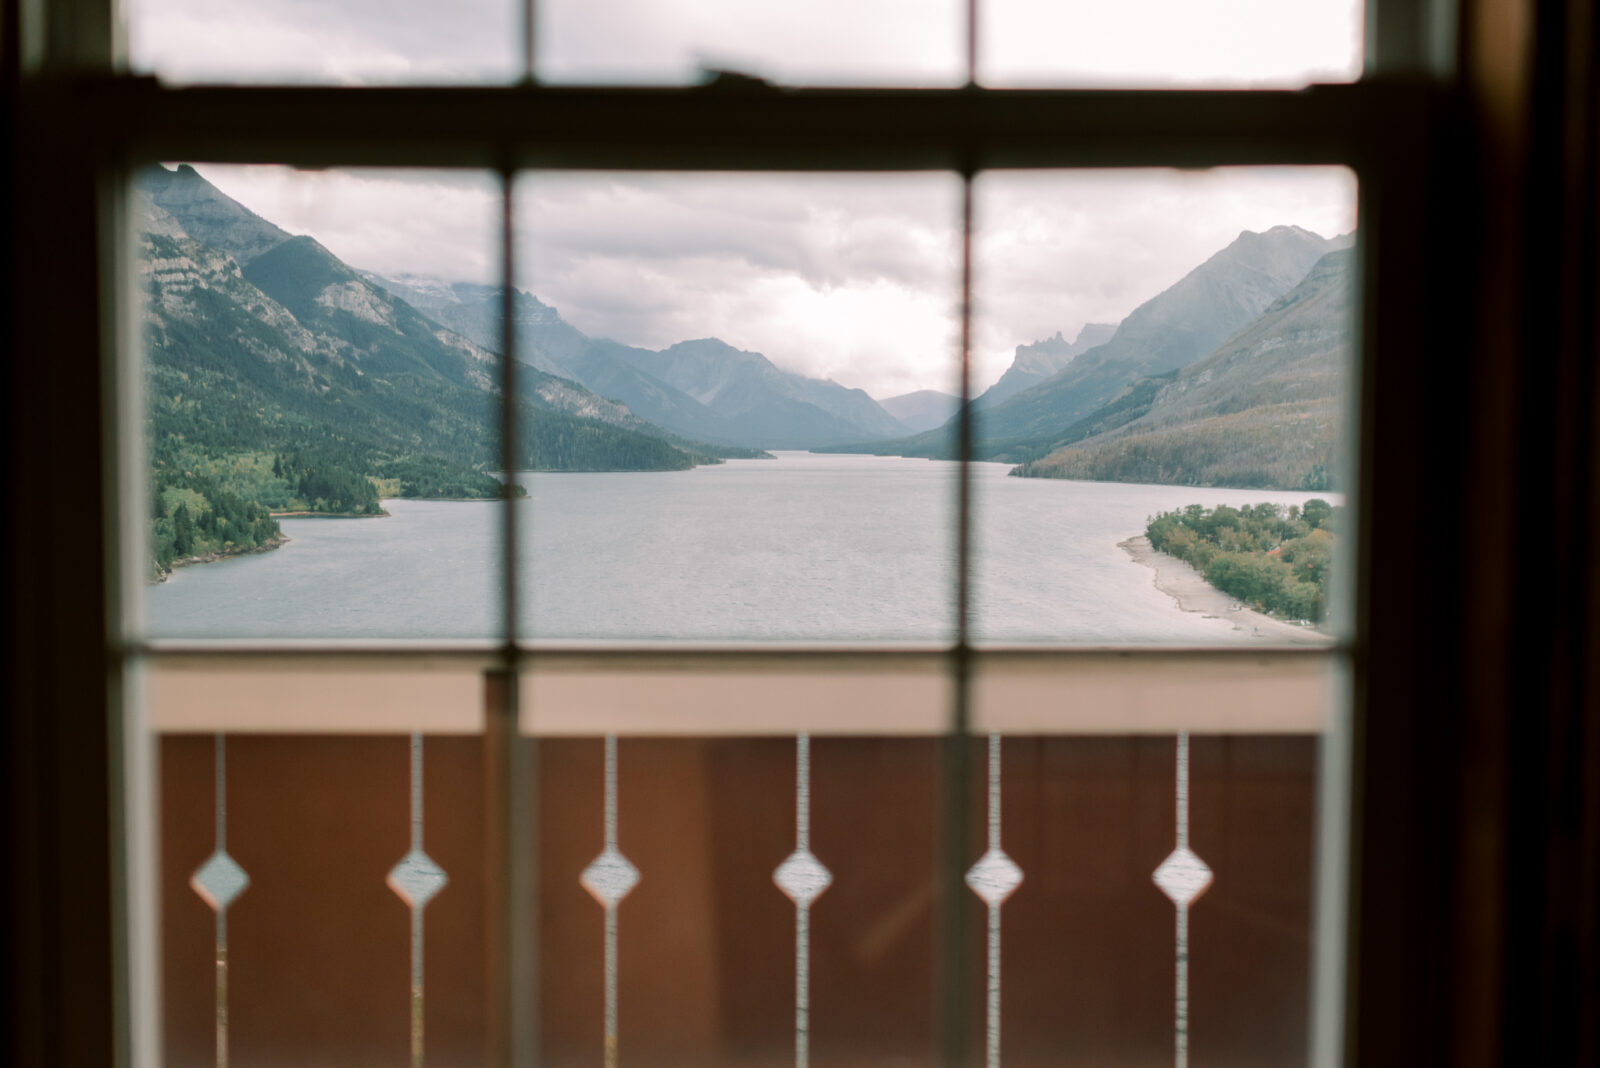 Waterton Elopement at the Prince of Wales Hotel, Intimate Wedding in Waterton Alberta, Fall Wedding Inspiration